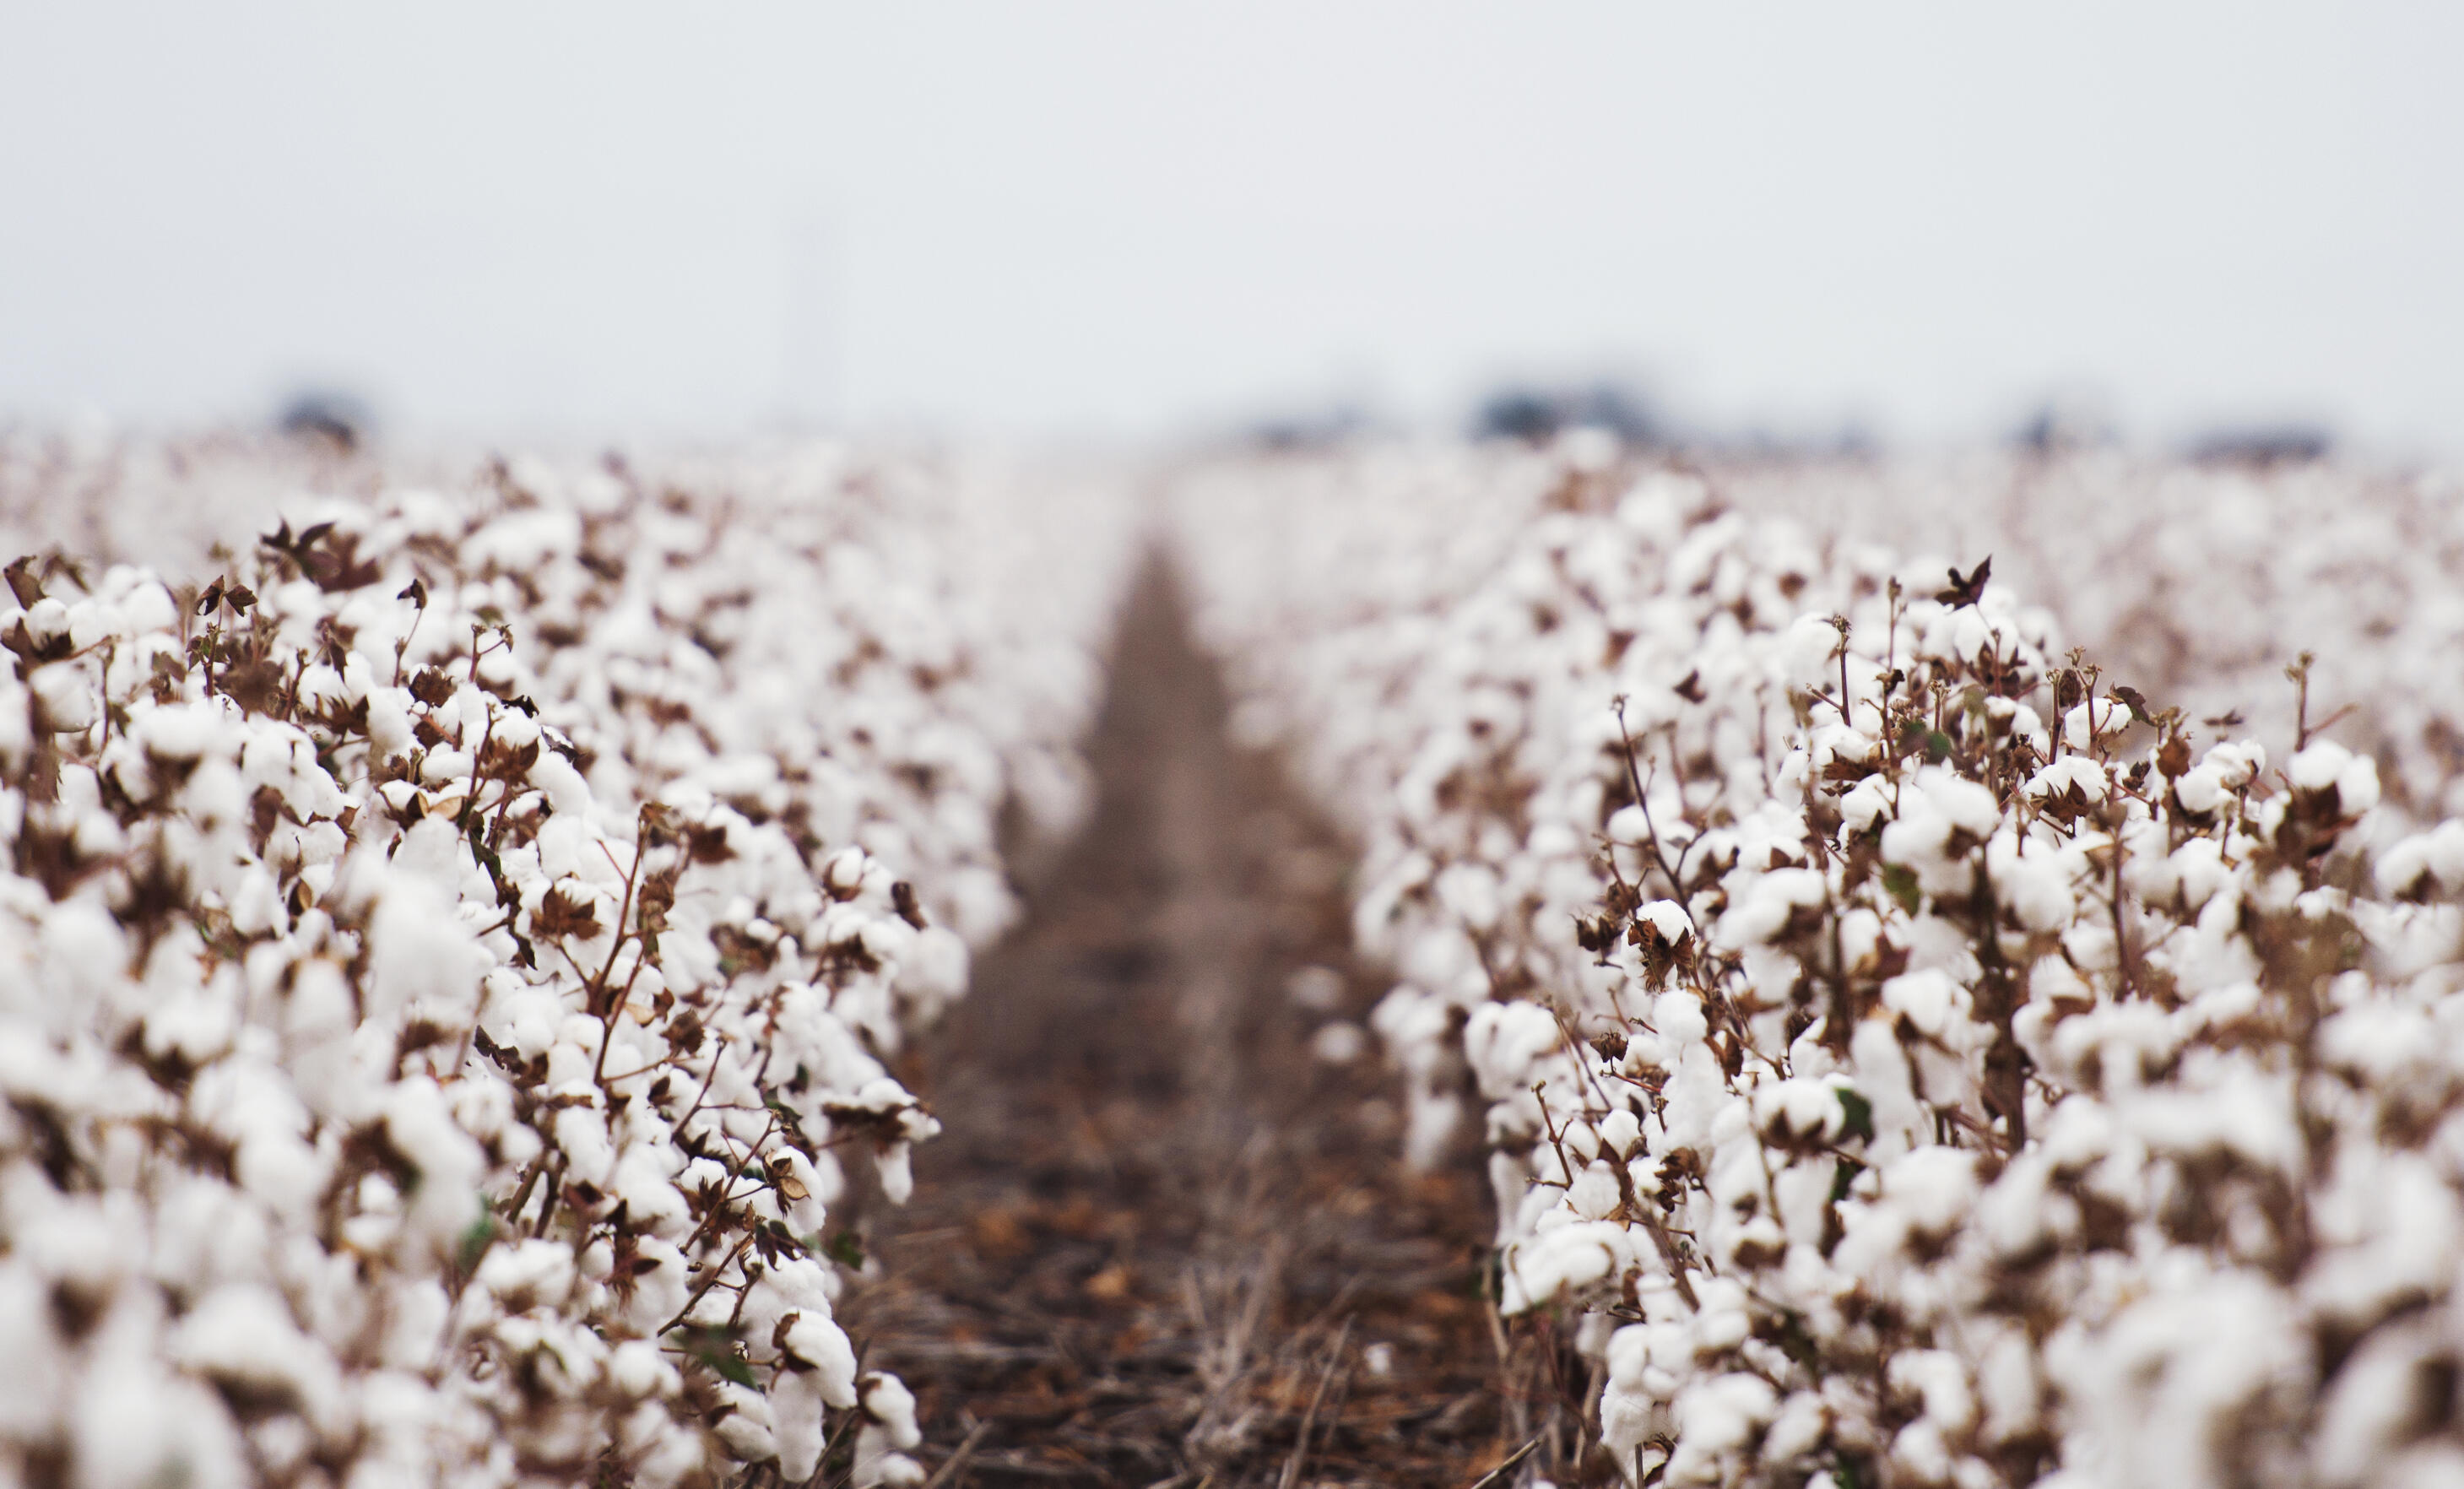 Cotton field. Rosendahl products and series of cotton